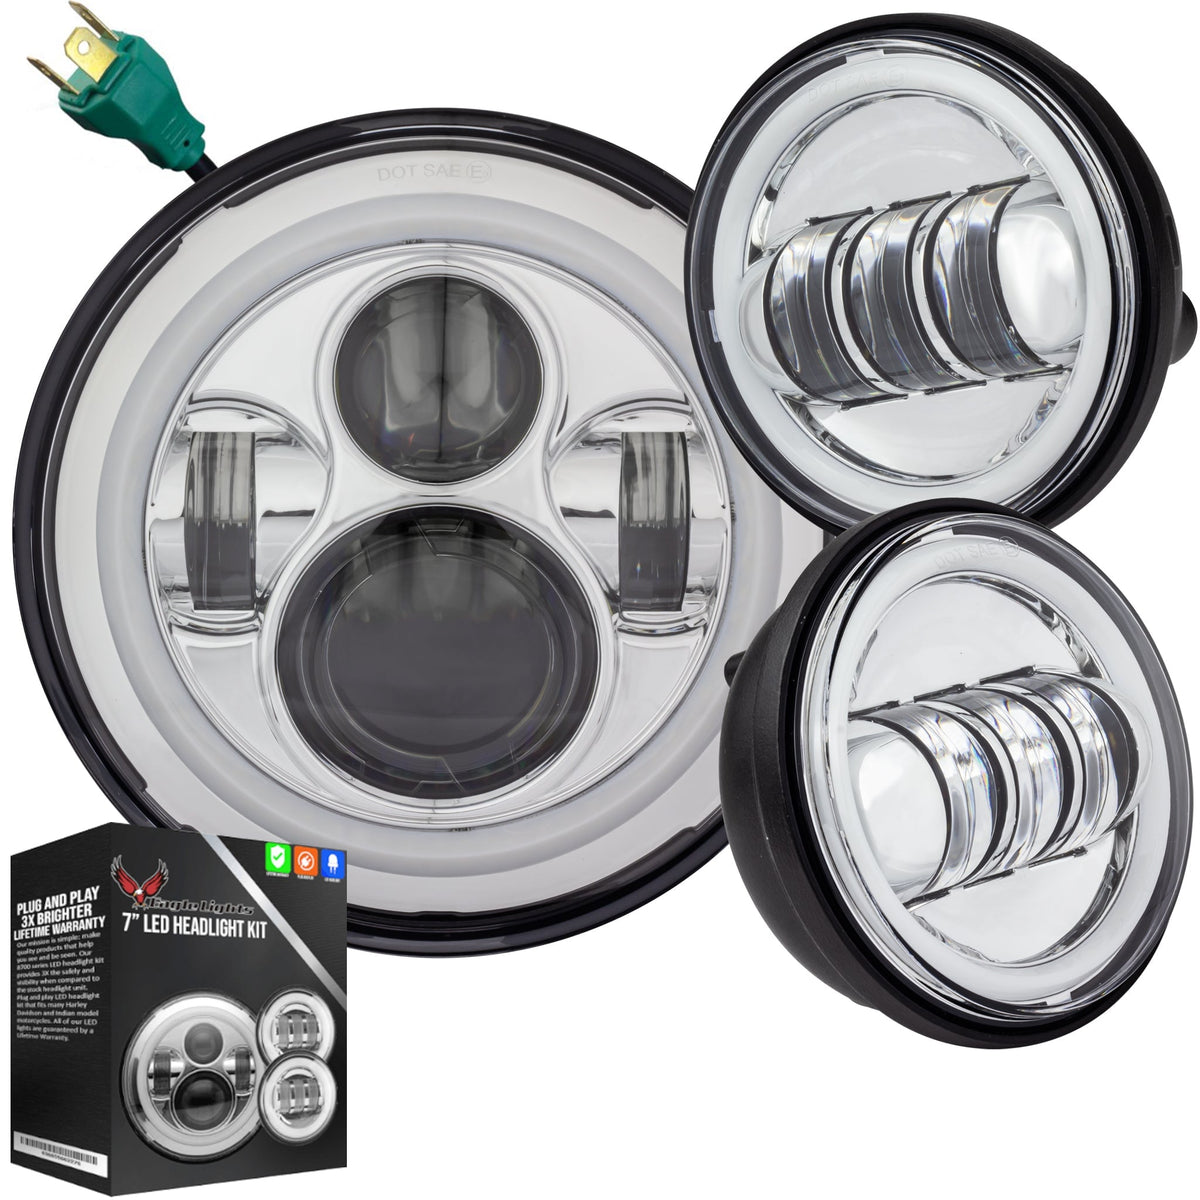 Eagle Lights 7" LED Headlight and 4.5" LED Passing Light Kit with Halo Rings for Harley Davidson and Indian Motorcycles - Generation I / Chrome